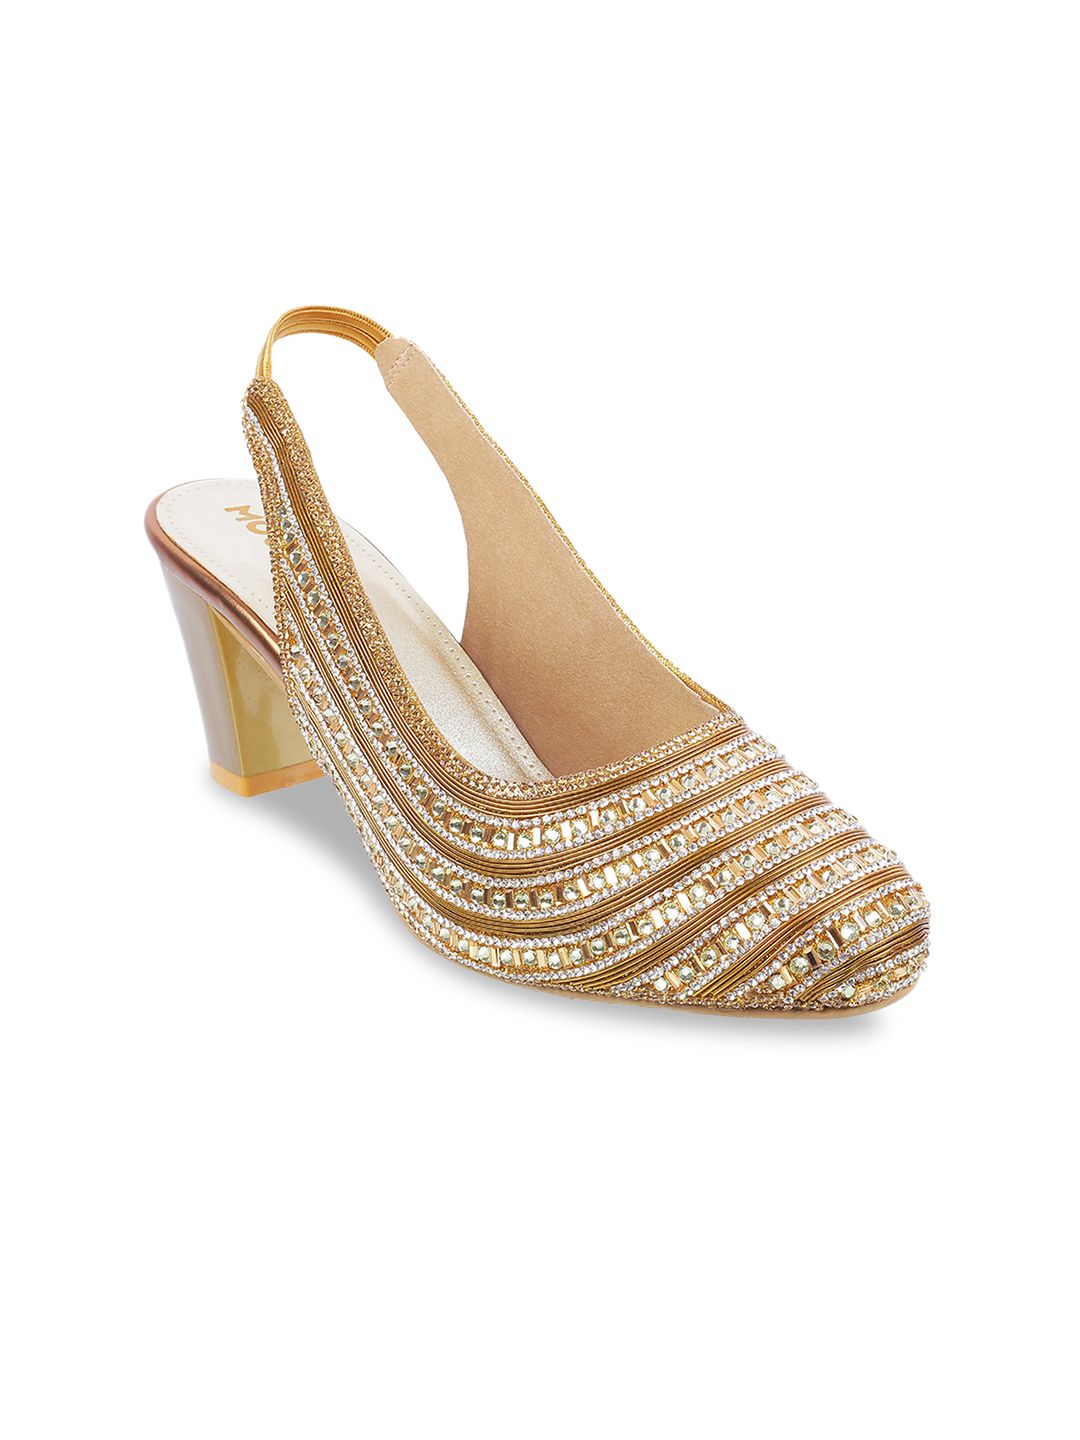 Mochi Women Antique Gold-Toned Embellished Pumps Price in India